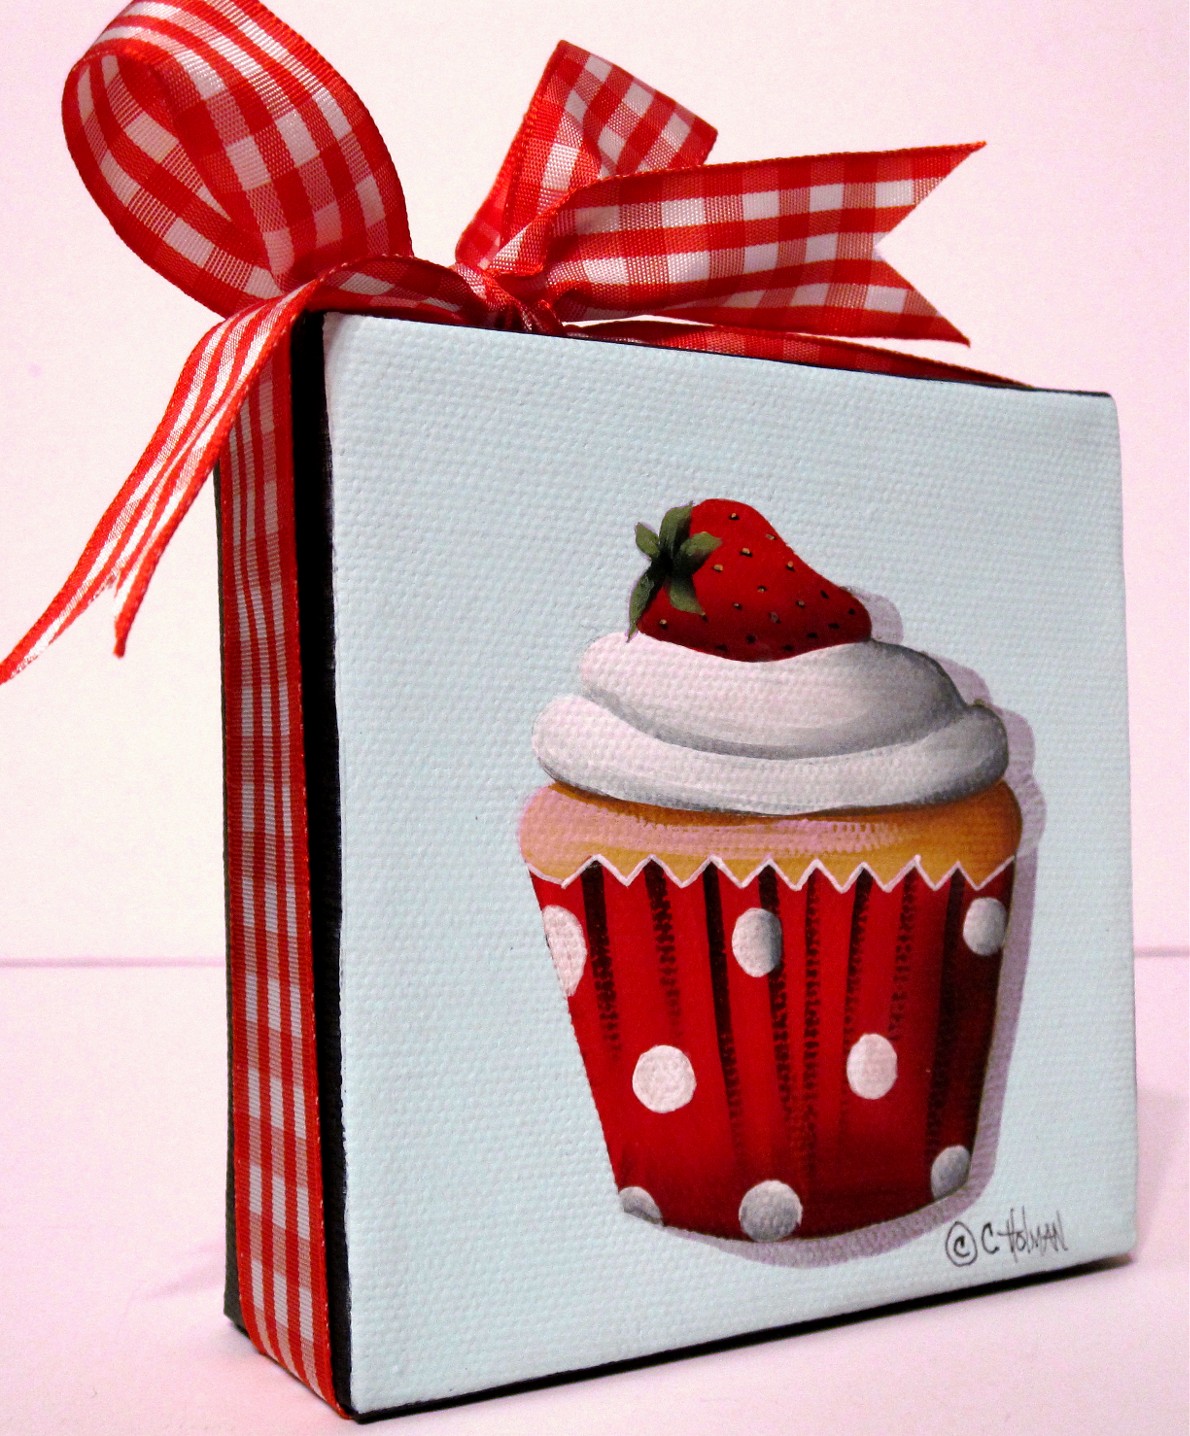 Strawberry Shortcake Cupcake Painting and Evening in Madrid